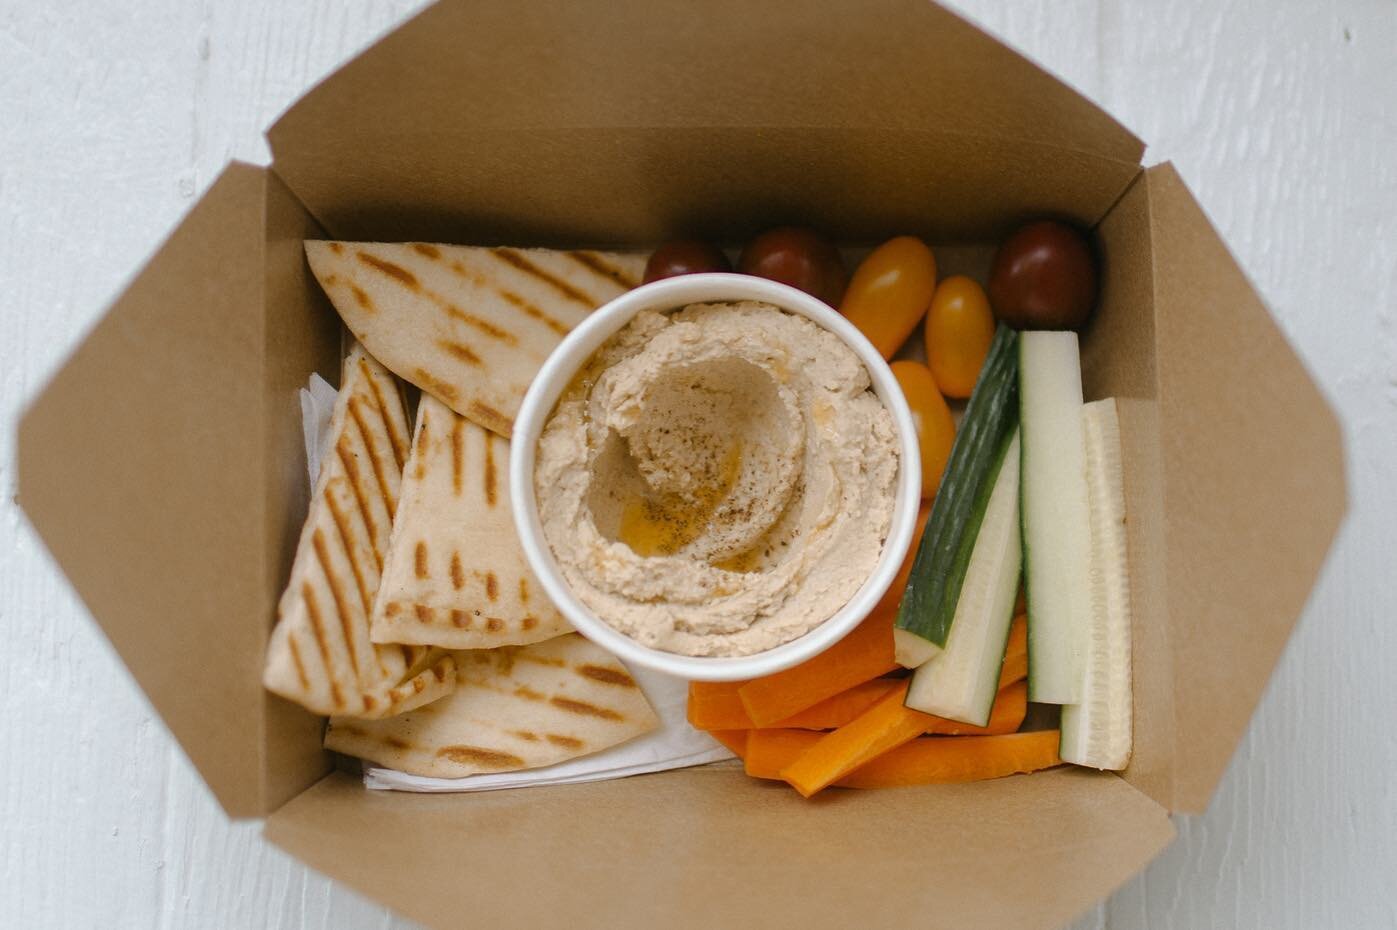 Hummus-to-go. Order online or pick up in the shop!